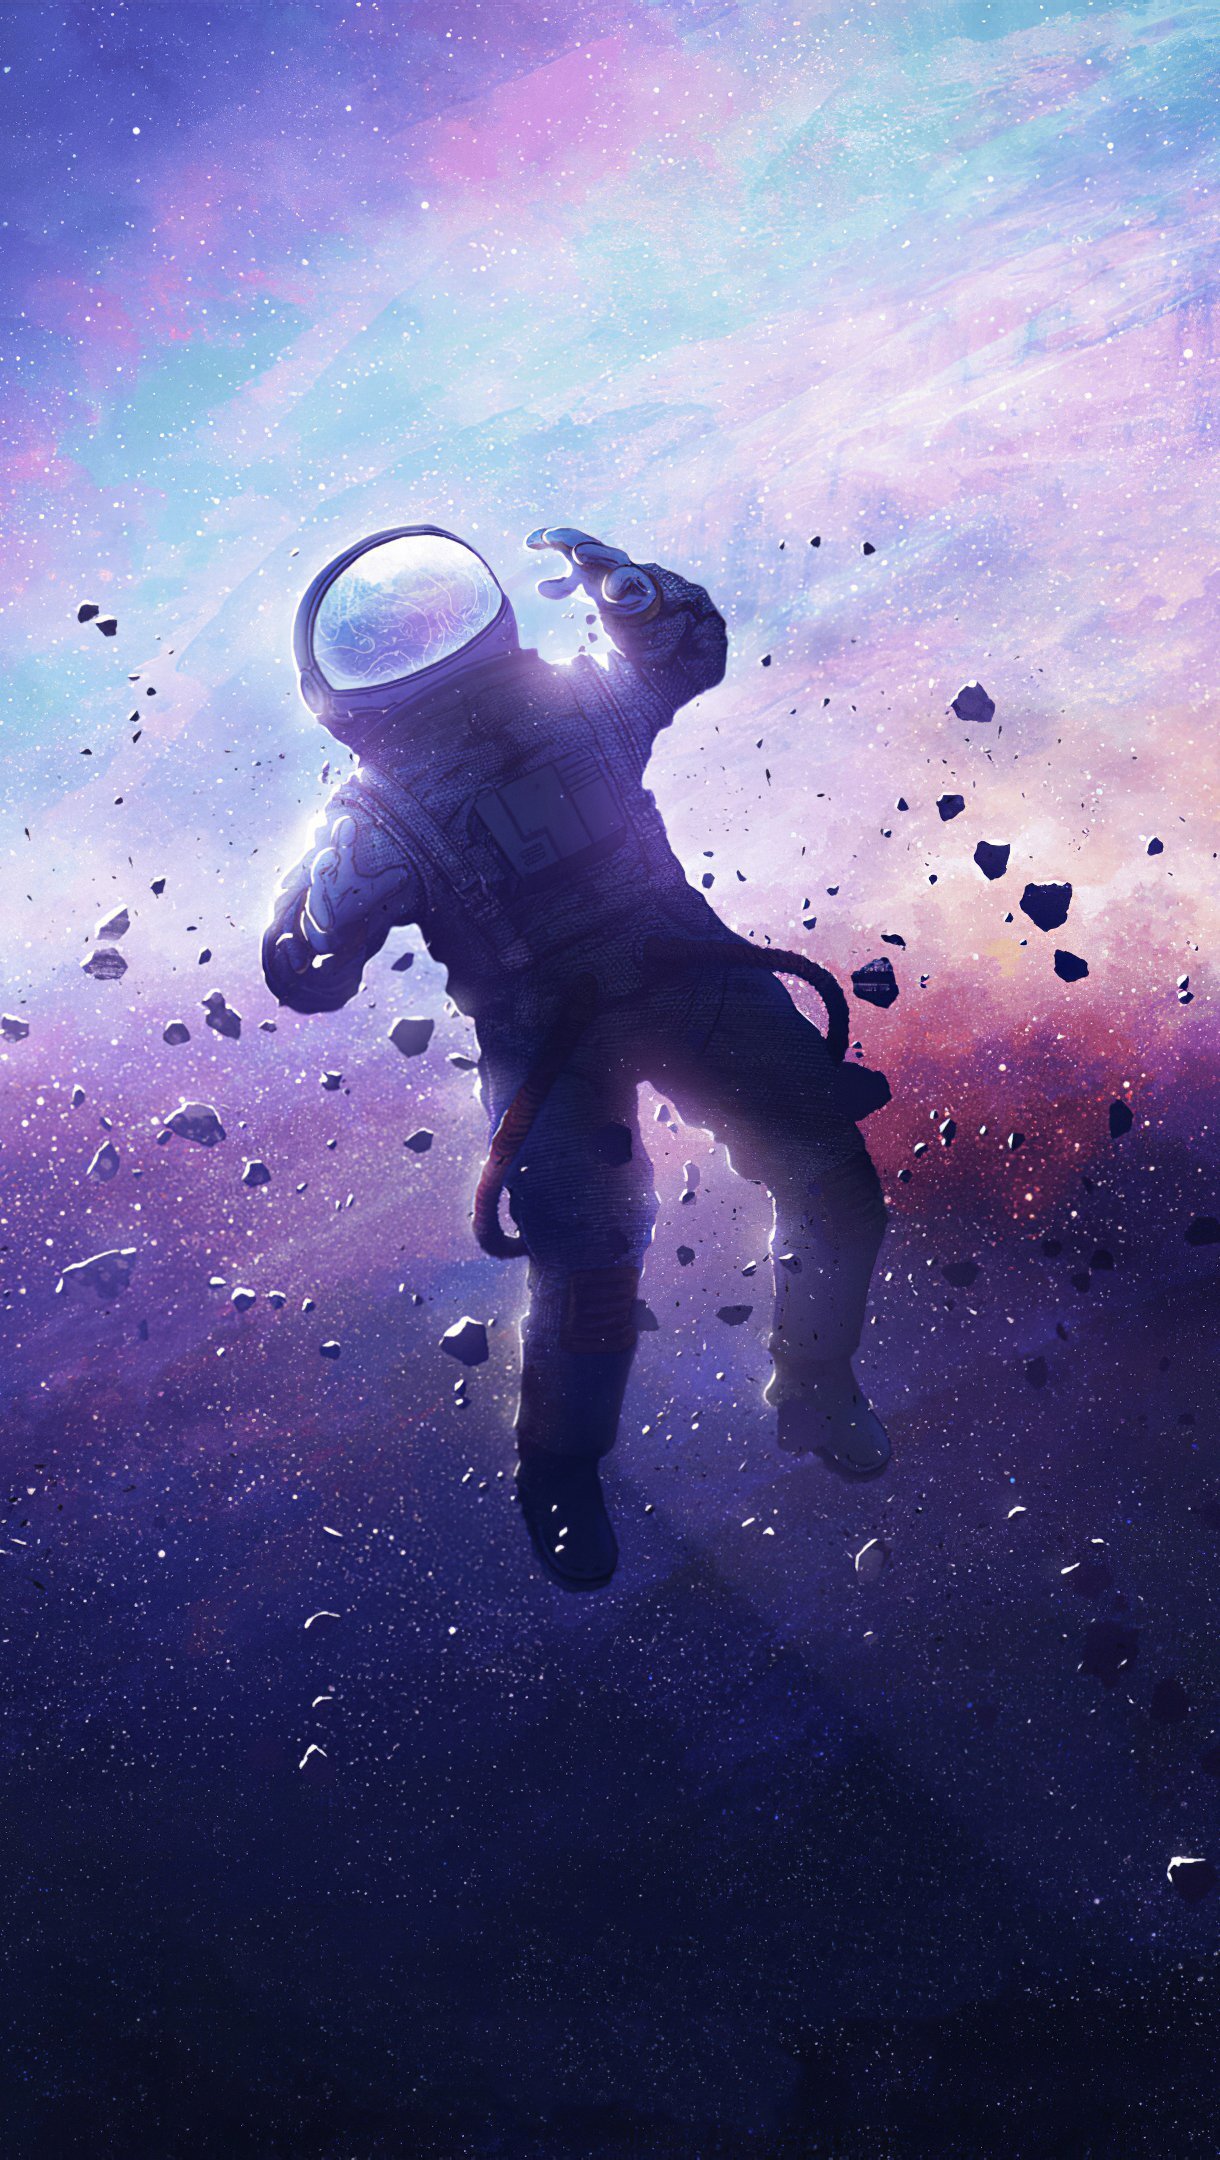 Astronaut Lost In Space Wallpaper 4k Ultra Hd Id5498 | Images and